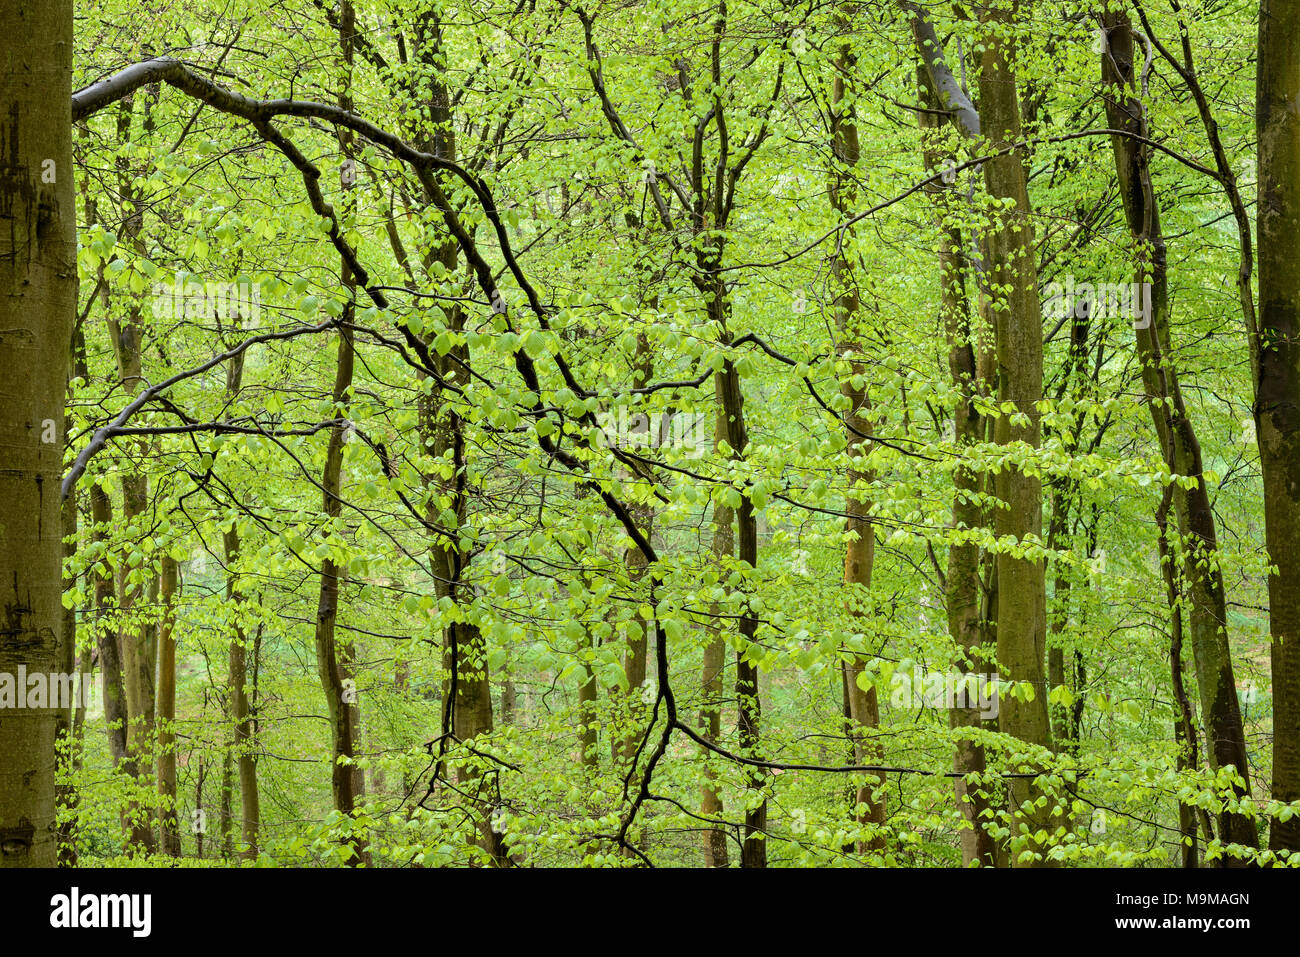 Fresh lime green leaves on the branches of a dense Beech woodland, wet with rain water after a brief Spring shower. Stock Photo